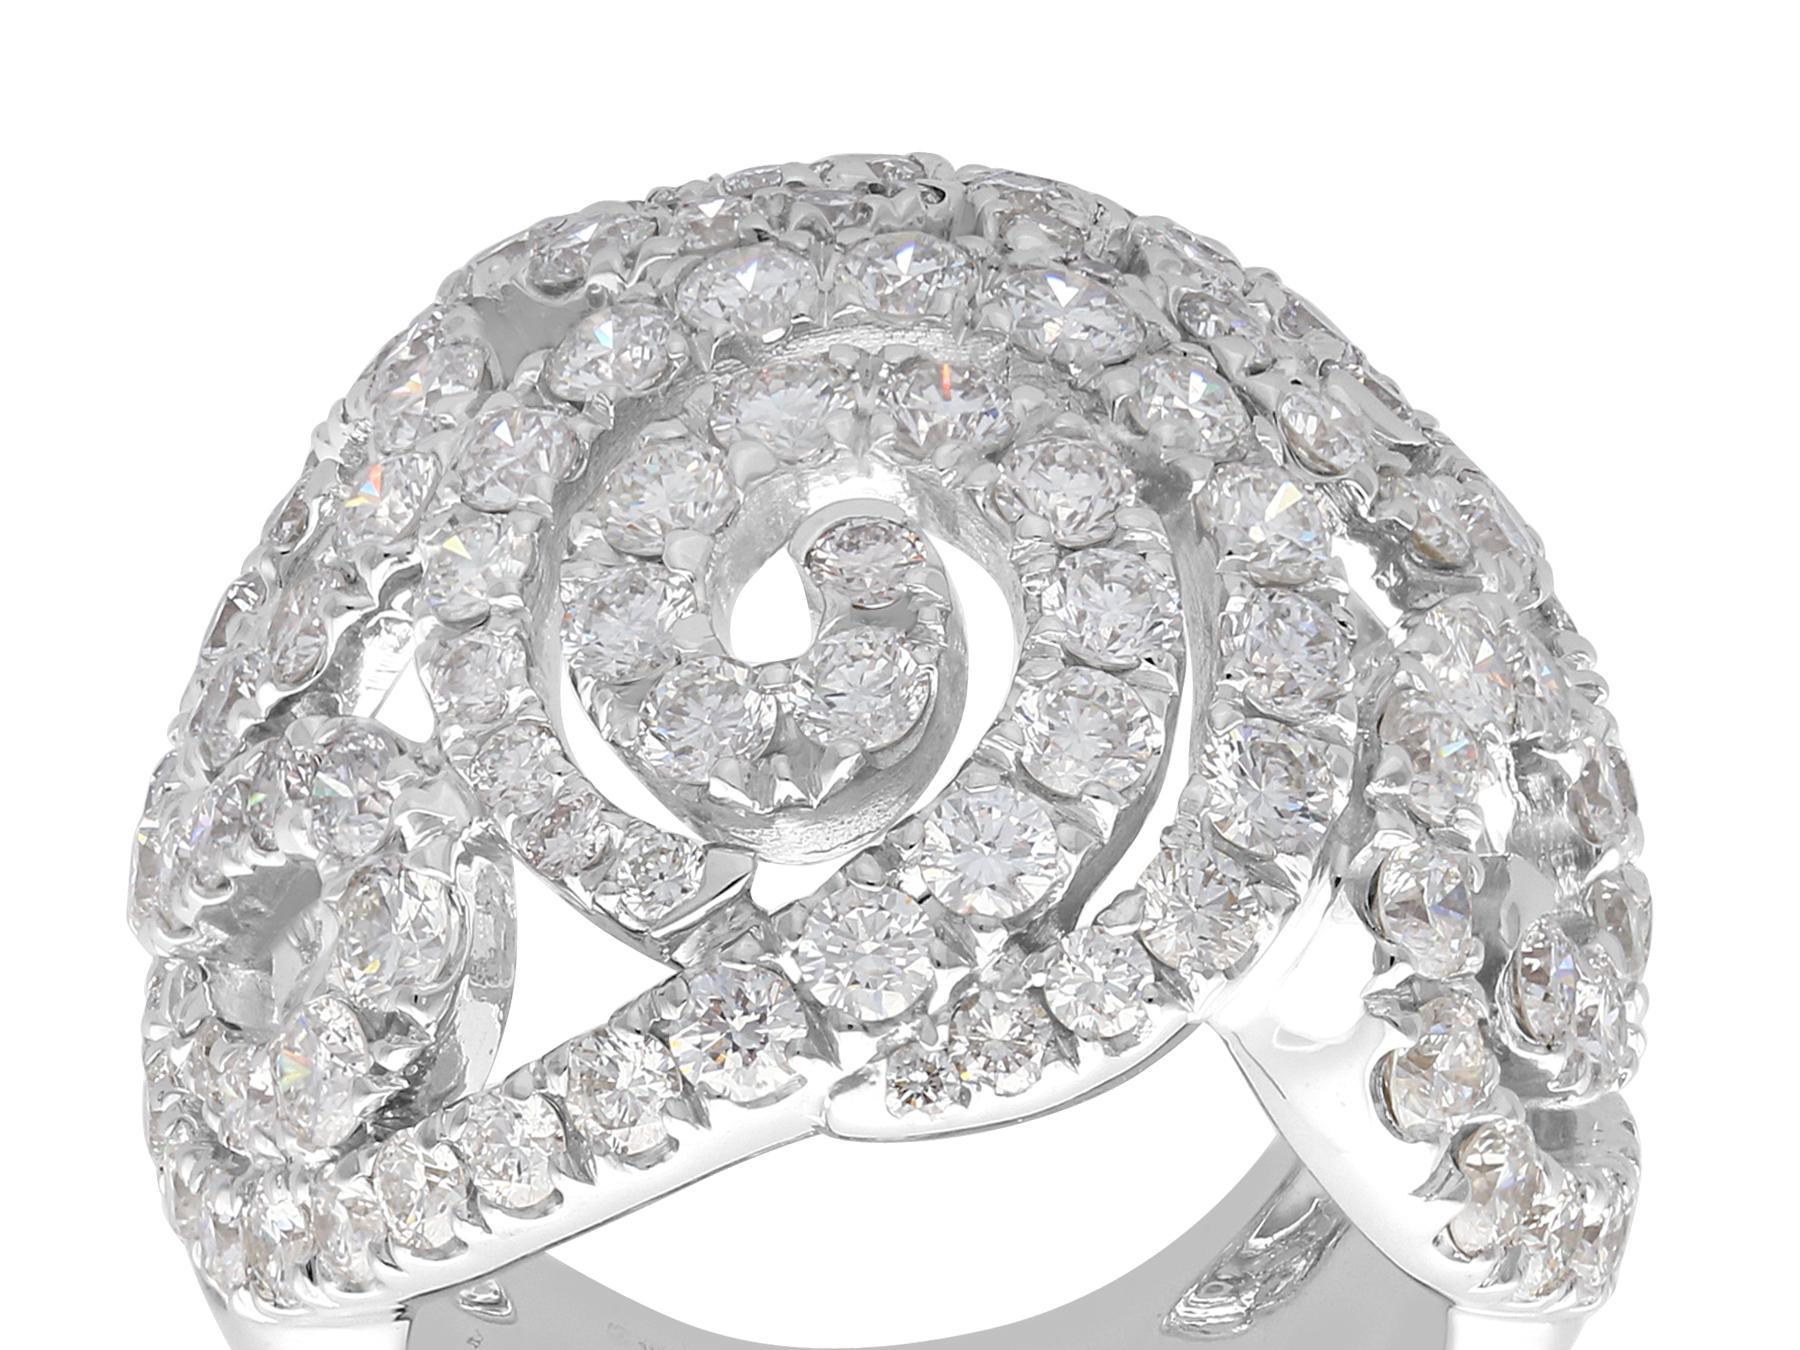 A stunning, fine and impressive vintage Italian 5.08 carat diamond and 18 karat white gold dress ring; part of our diverse diamond jewelry and estate jewelry collections

This stunning, fine and impressive vintage dress ring has been crafted in 18k